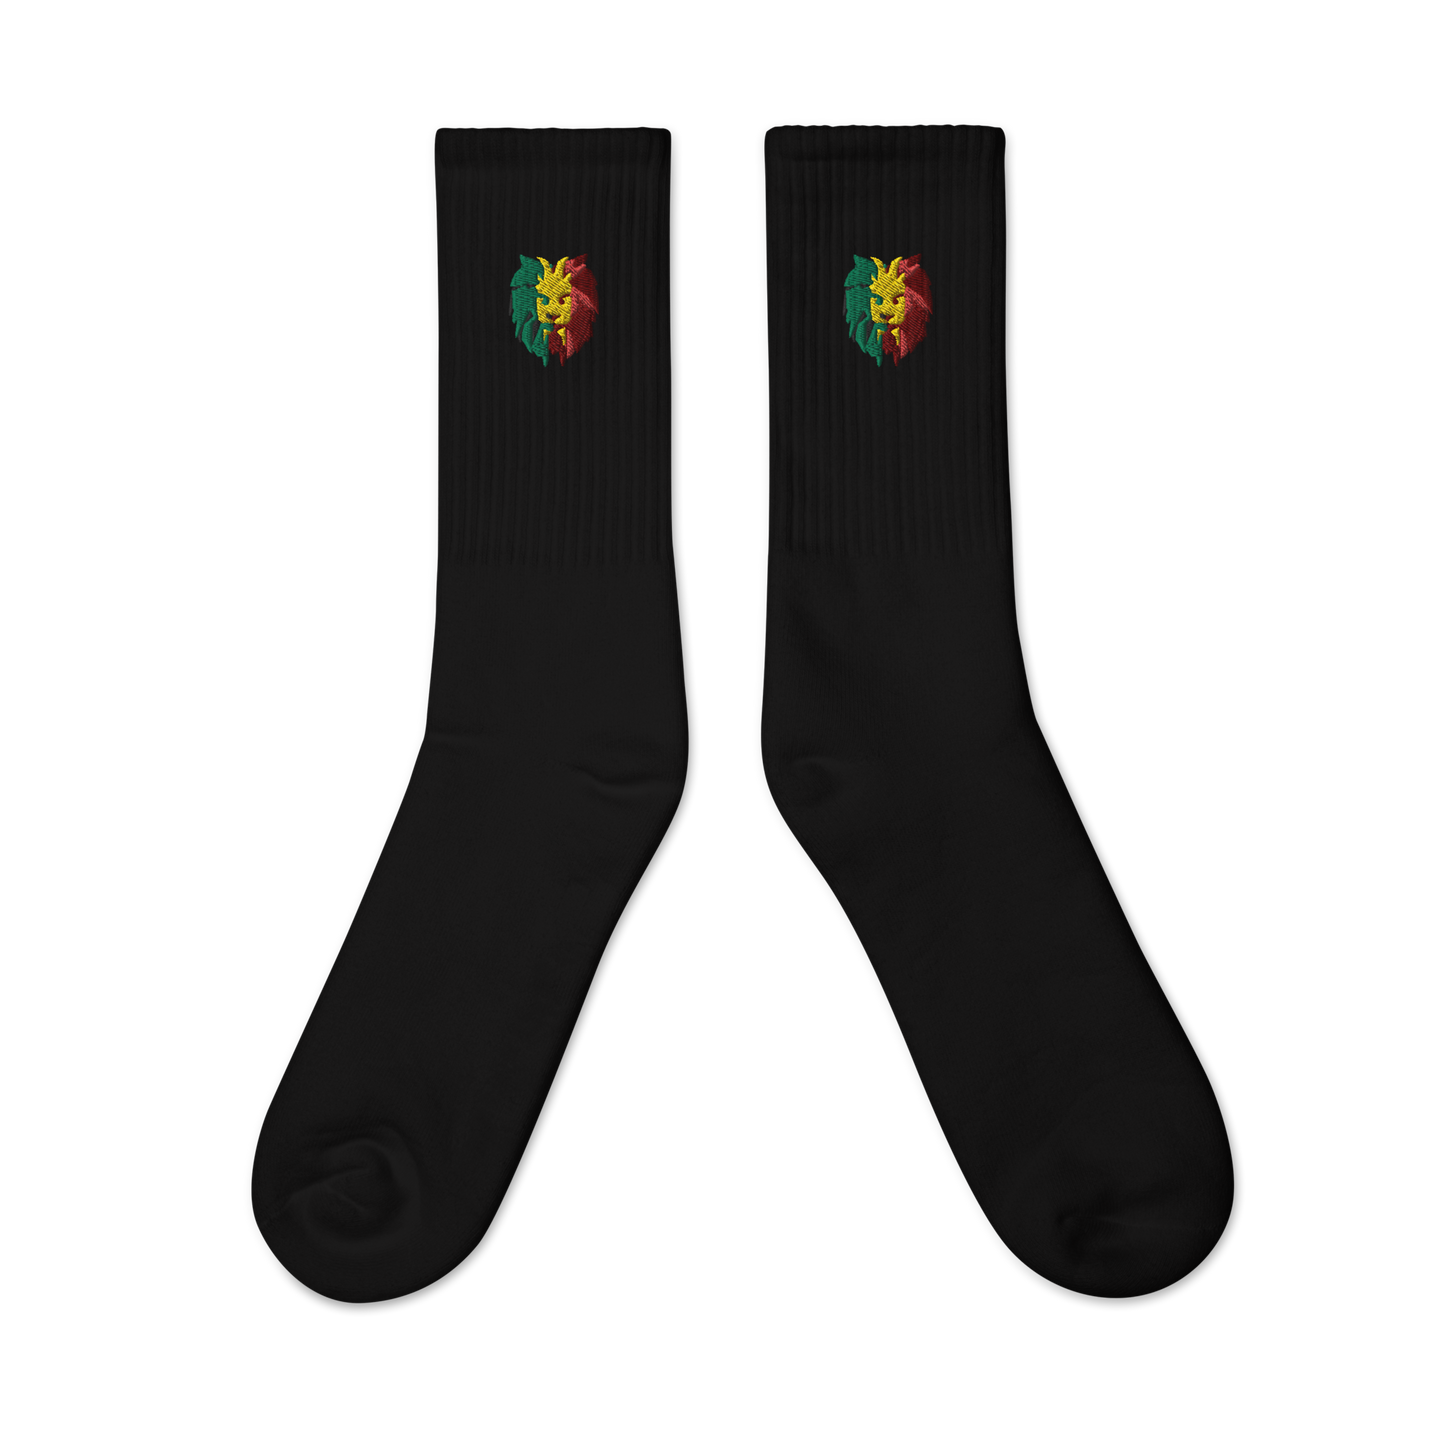 I Am Rooting: West Indian Embroidered socks